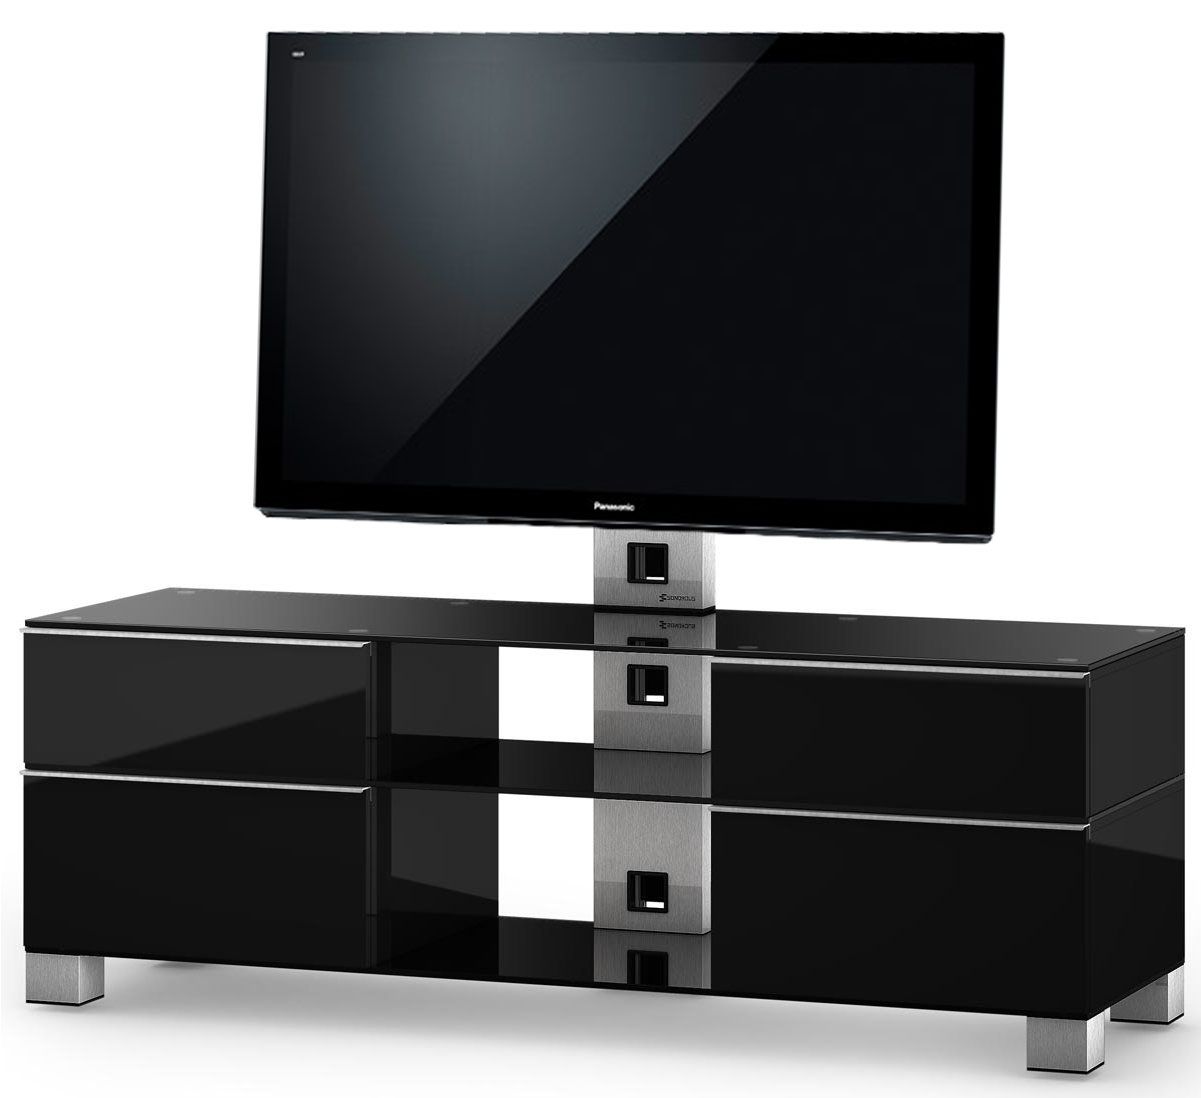 Sonorous Md8340 B Inx Blk Mood Tv Cabinet In Black For Up With Regard To Sonorous Tv Cabinets (View 1 of 15)